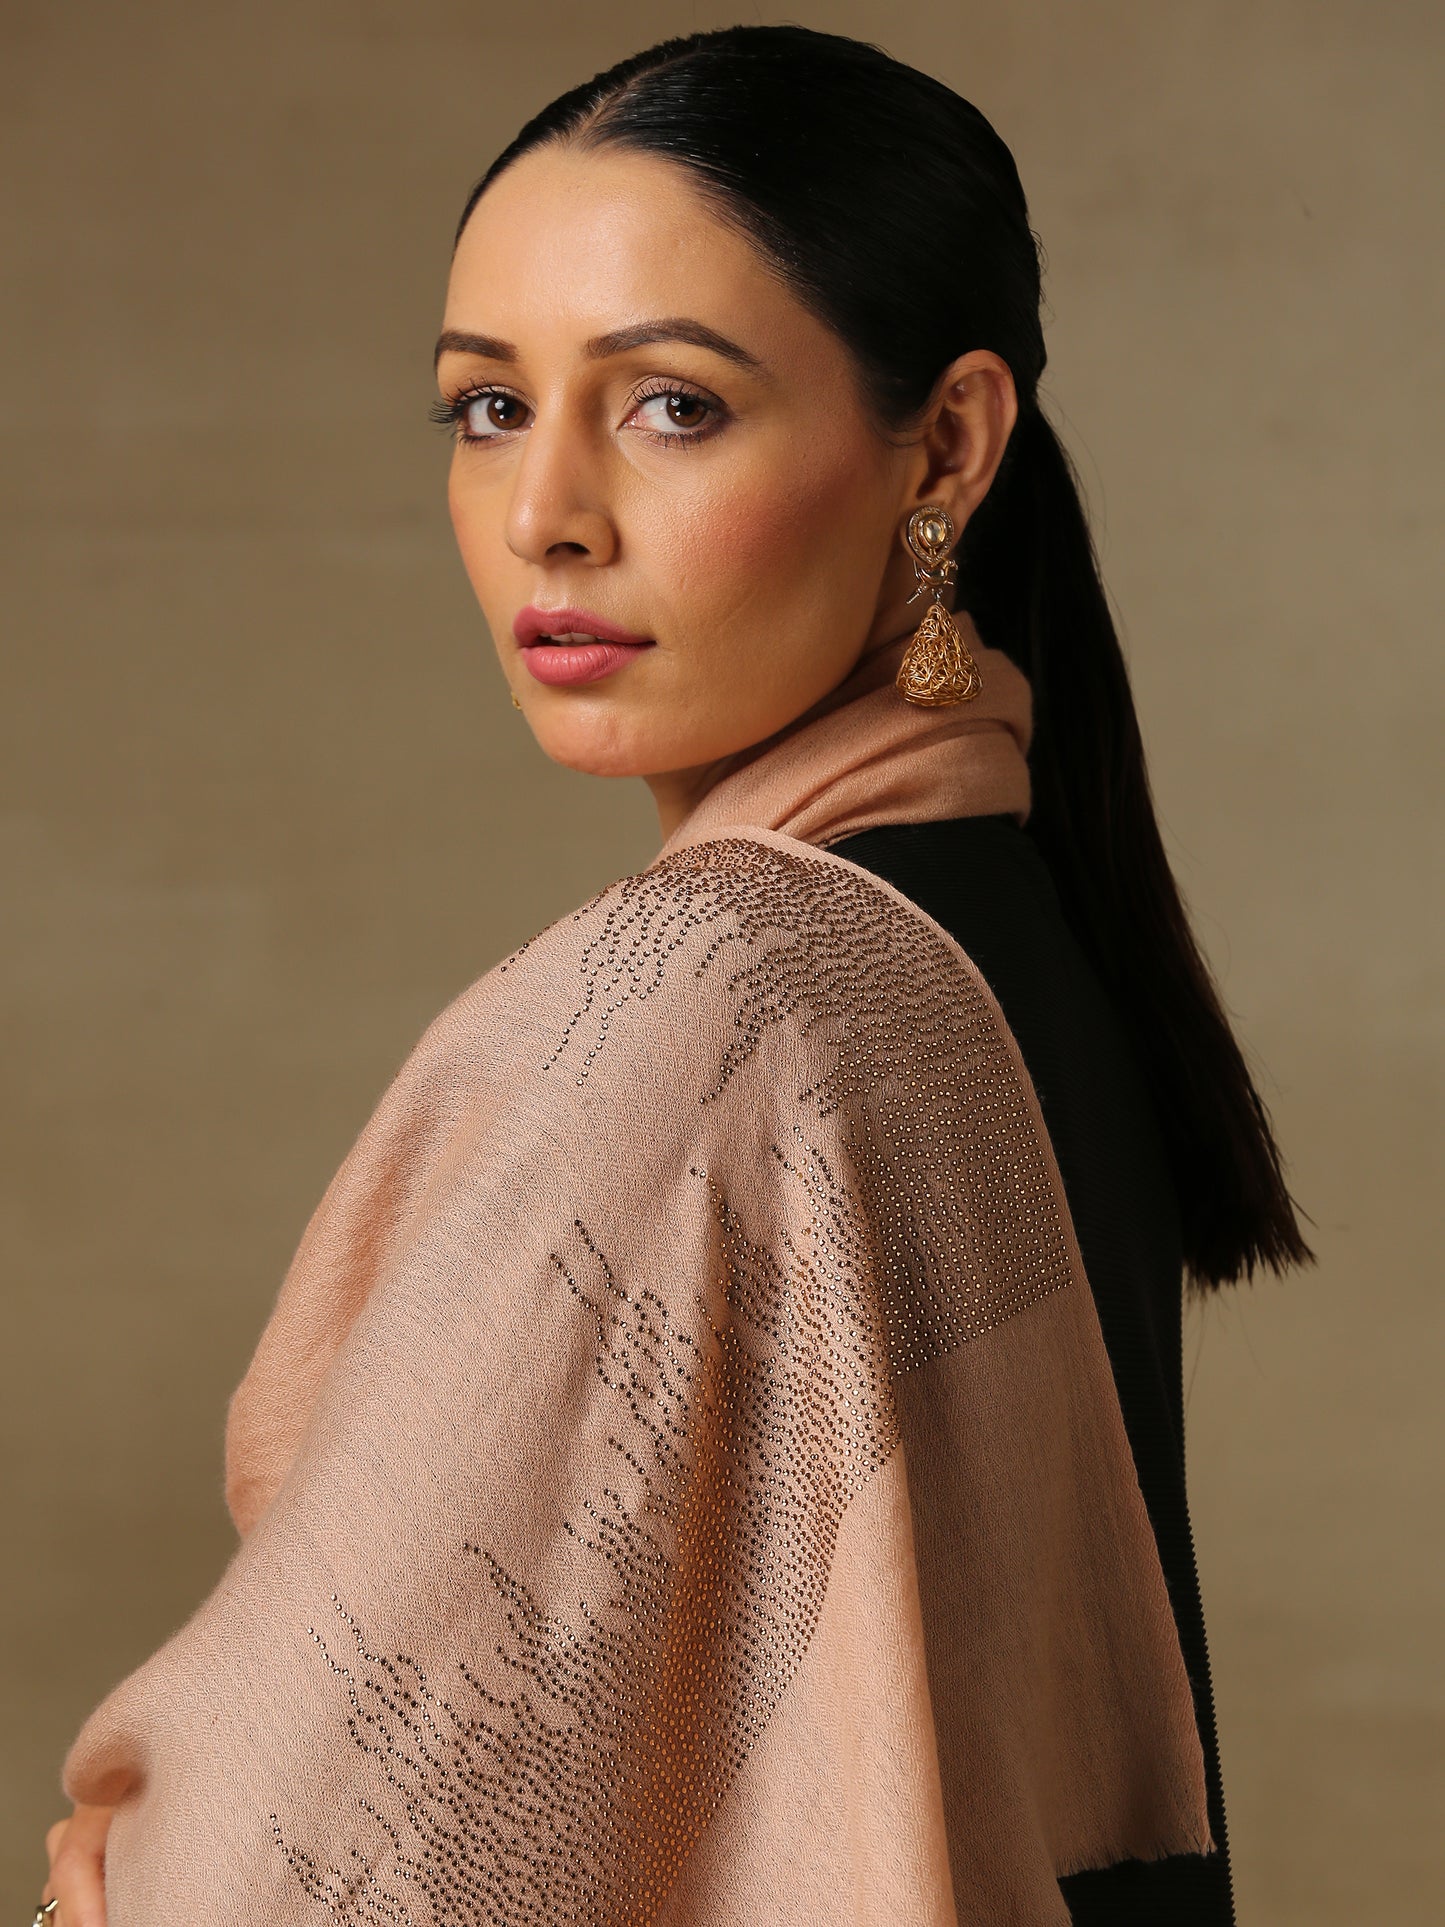 The model is wearing a blush coloured stole from the Era of Zaywar Border Swarovski Stole collection, hand embellished with fine gold swarovski in a flames of fire design. 